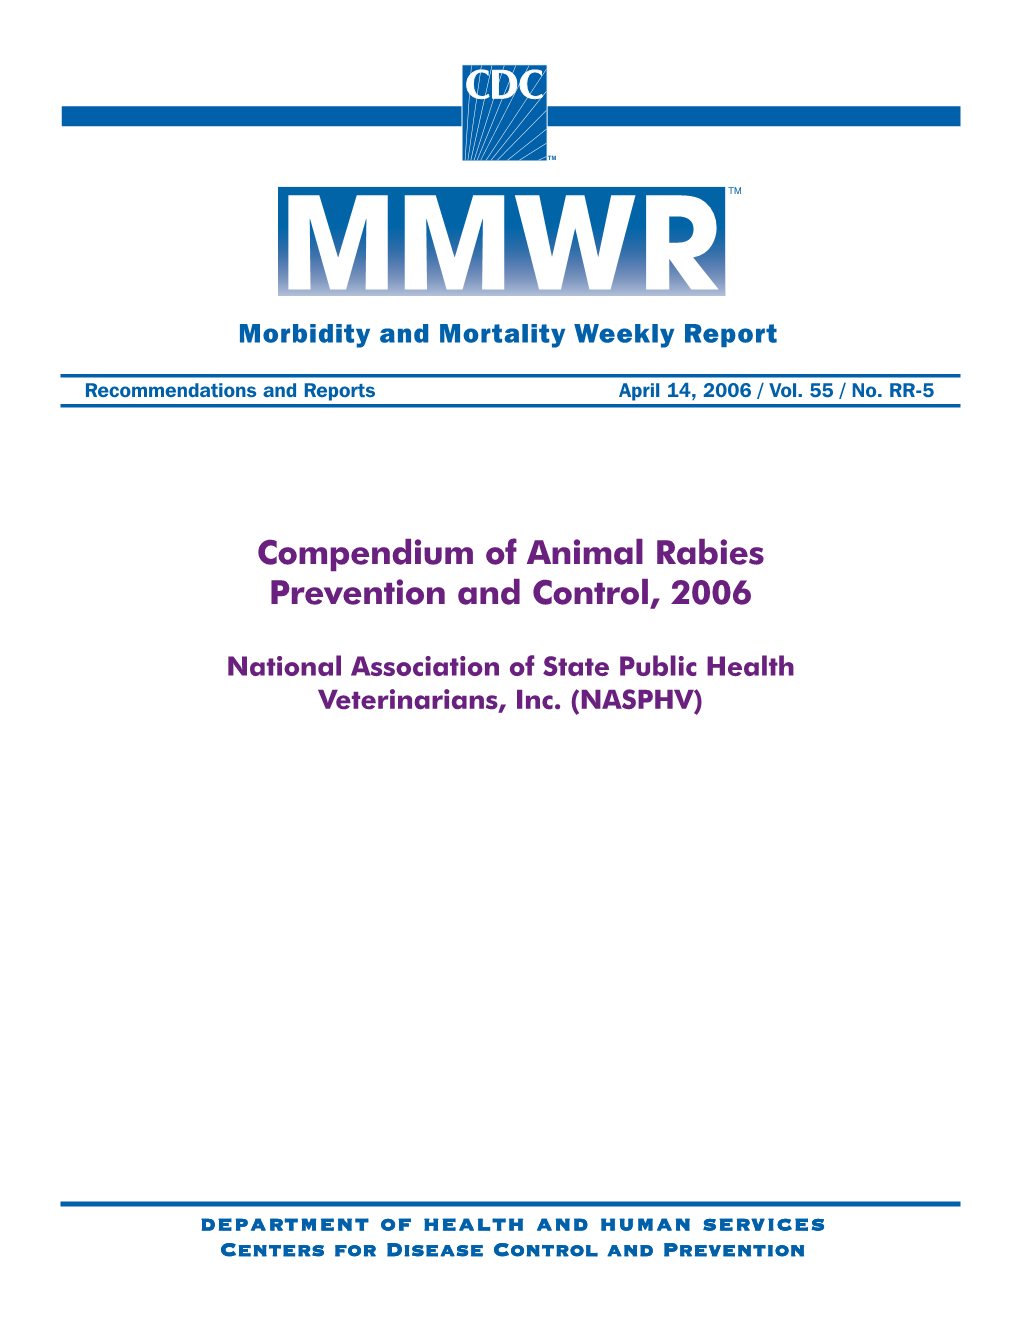 Compendium of Animal Rabies Prevention and Control, 2006